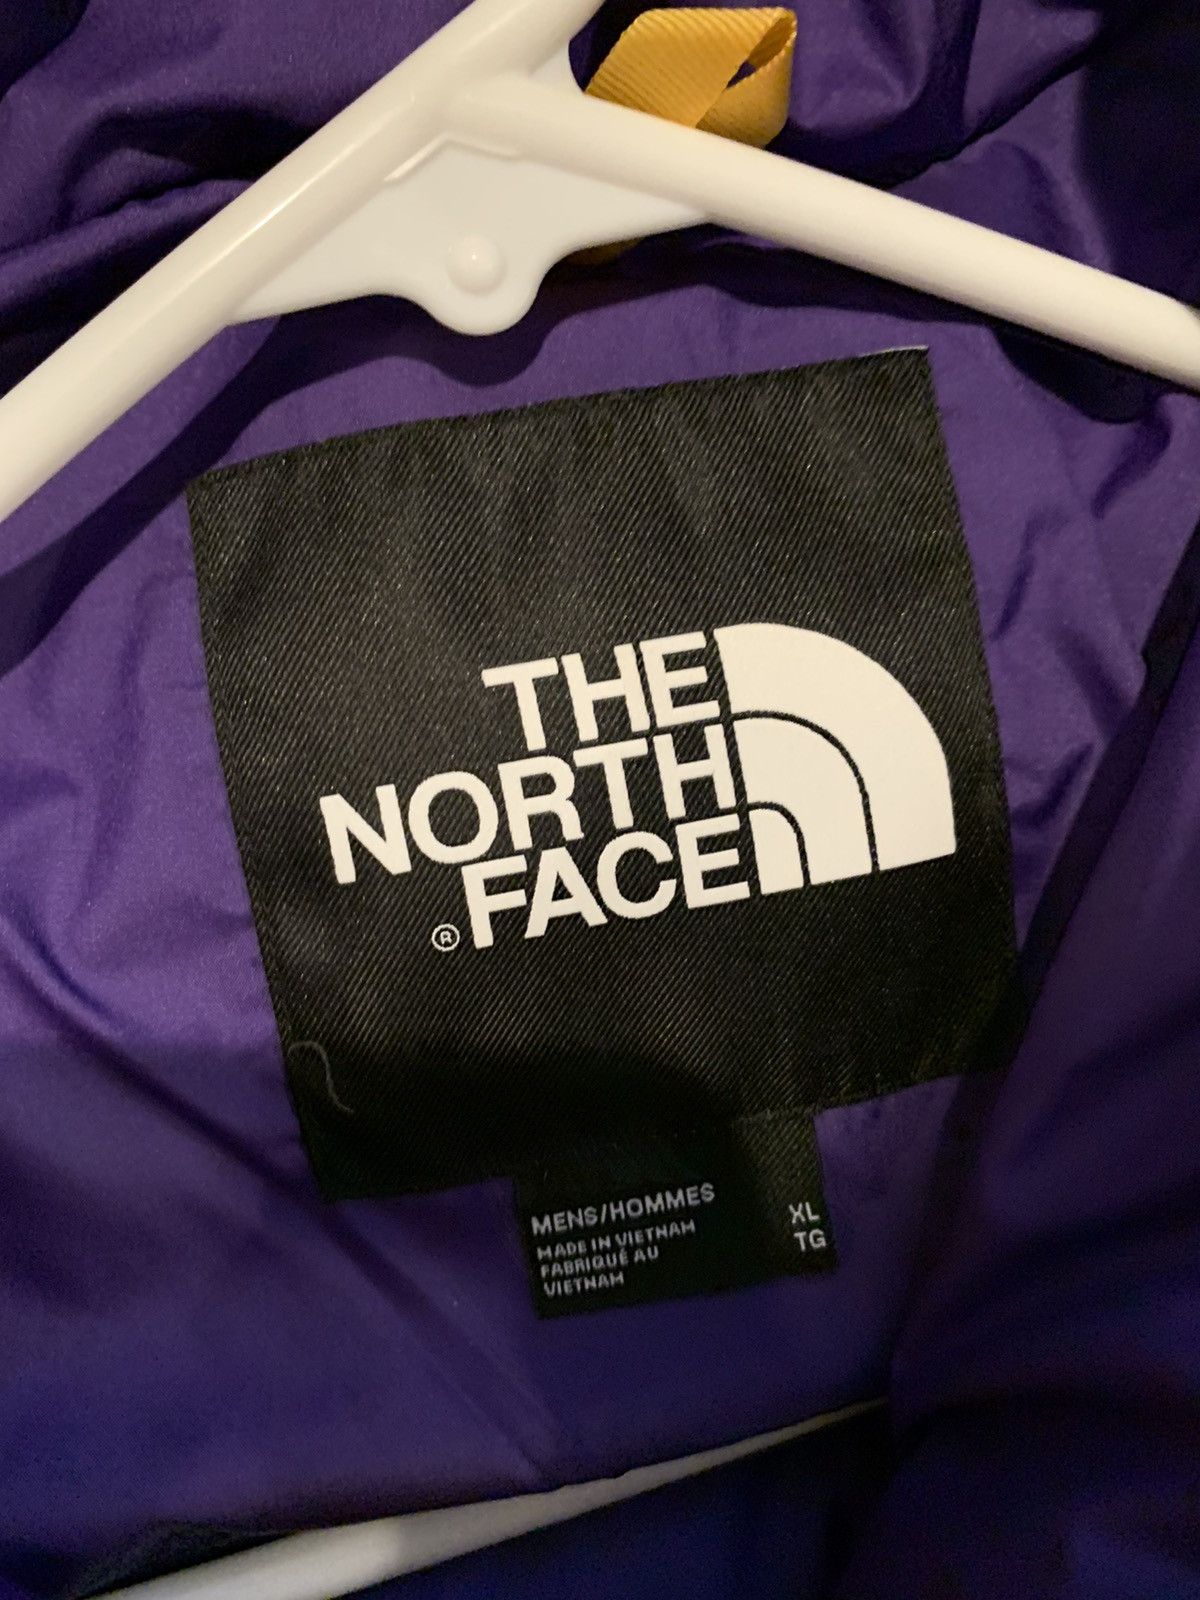 The North Face Northface color block parka puffer Size US XL / EU 56 / 4 - 3 Preview